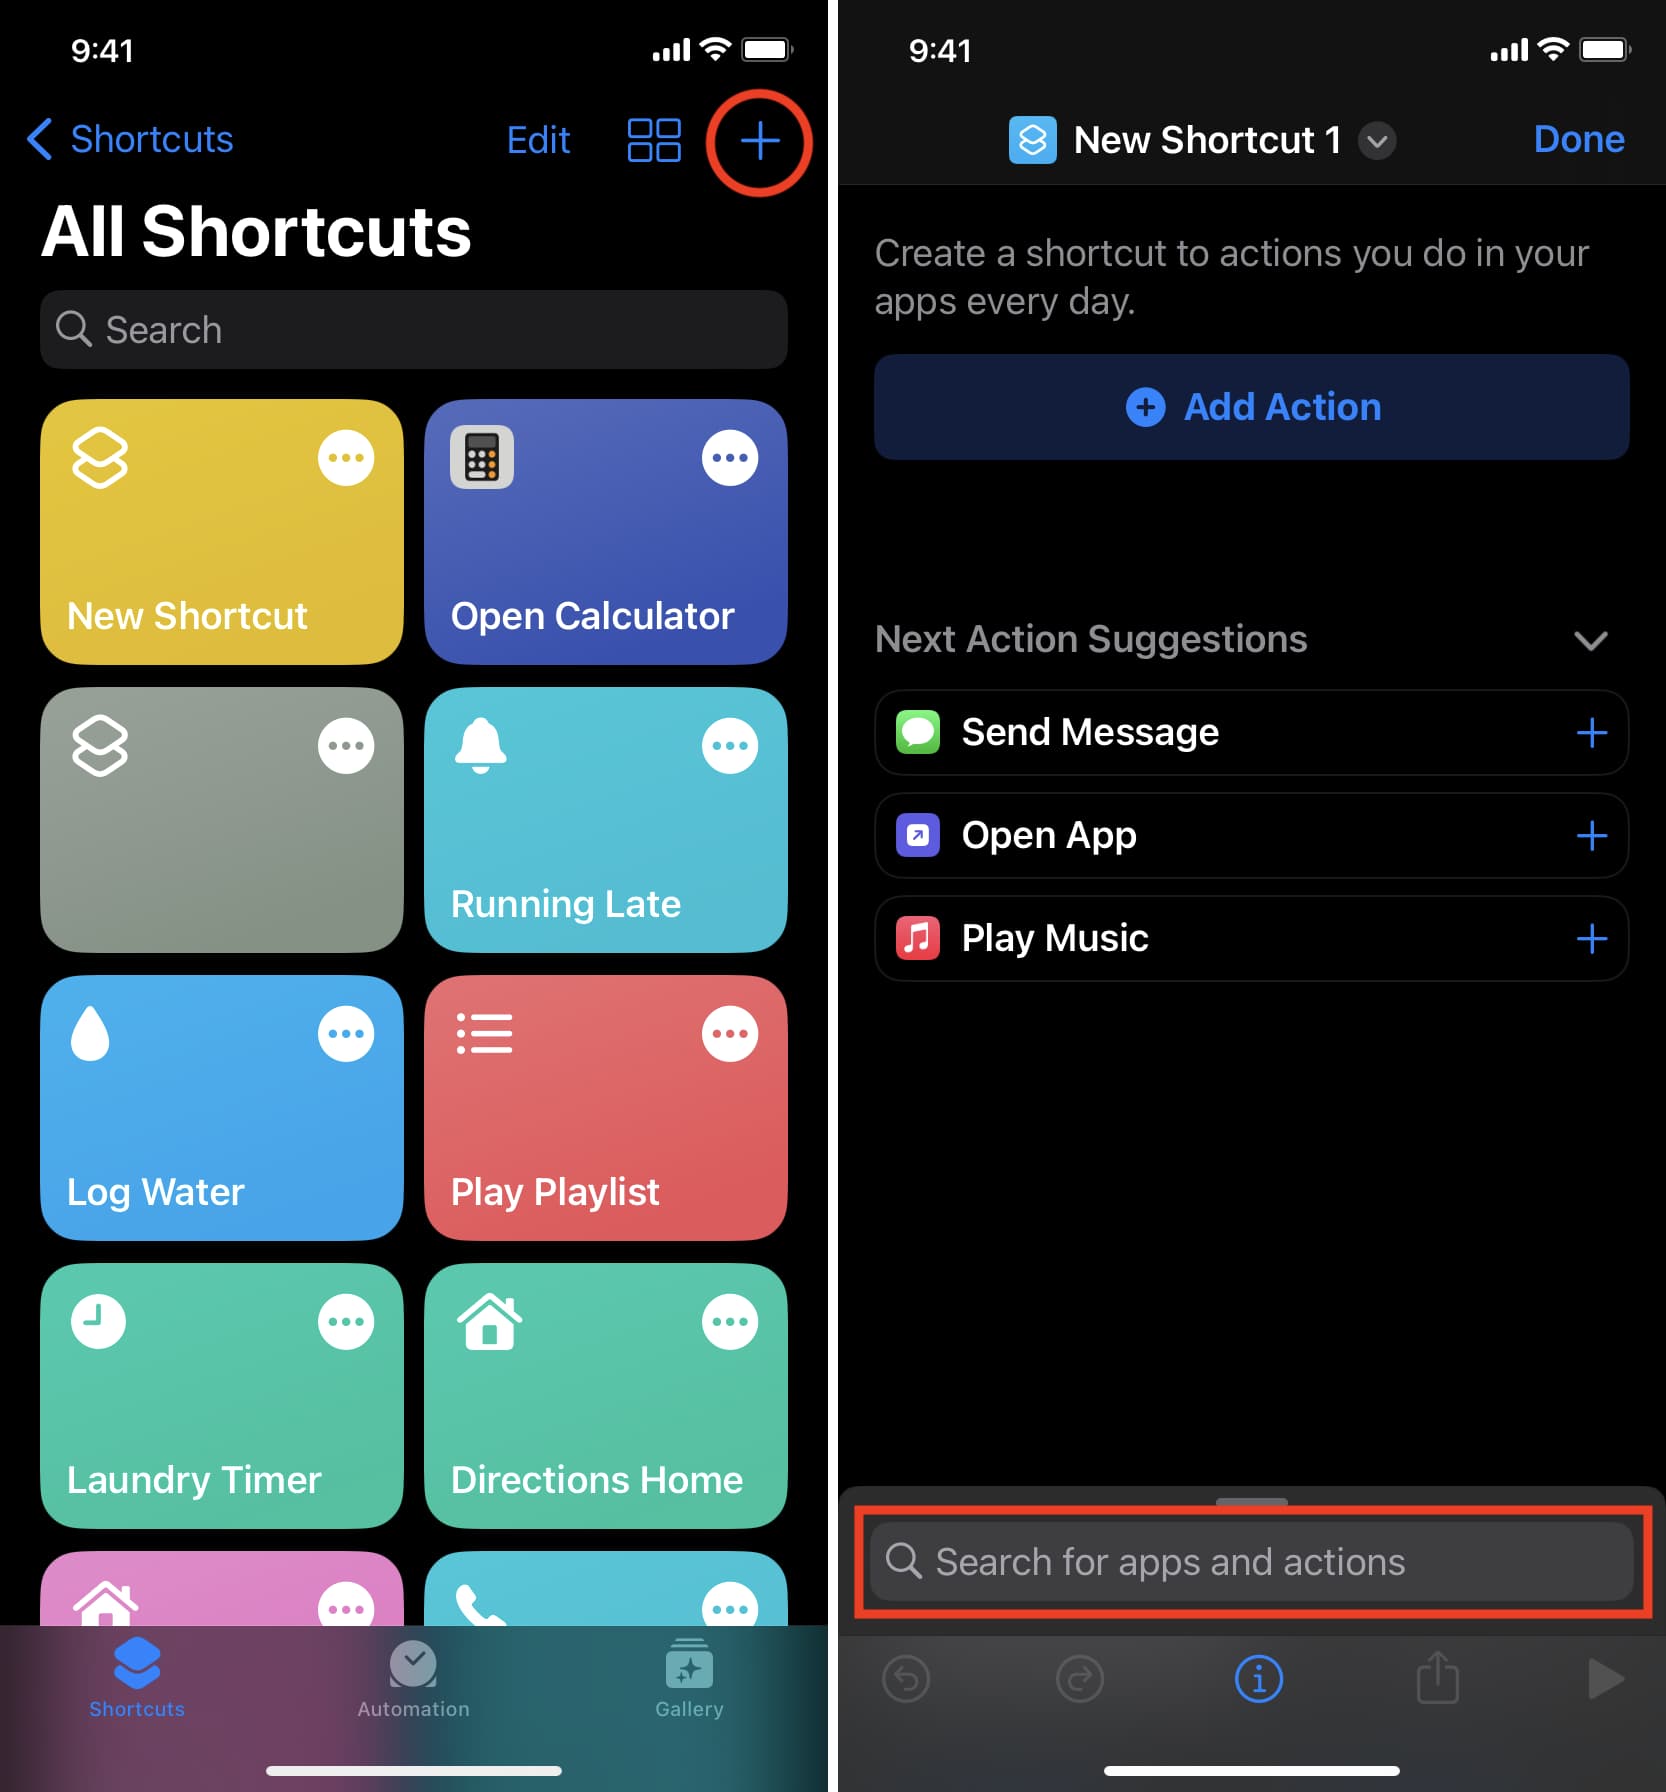 Start building a shortcut on iPhone